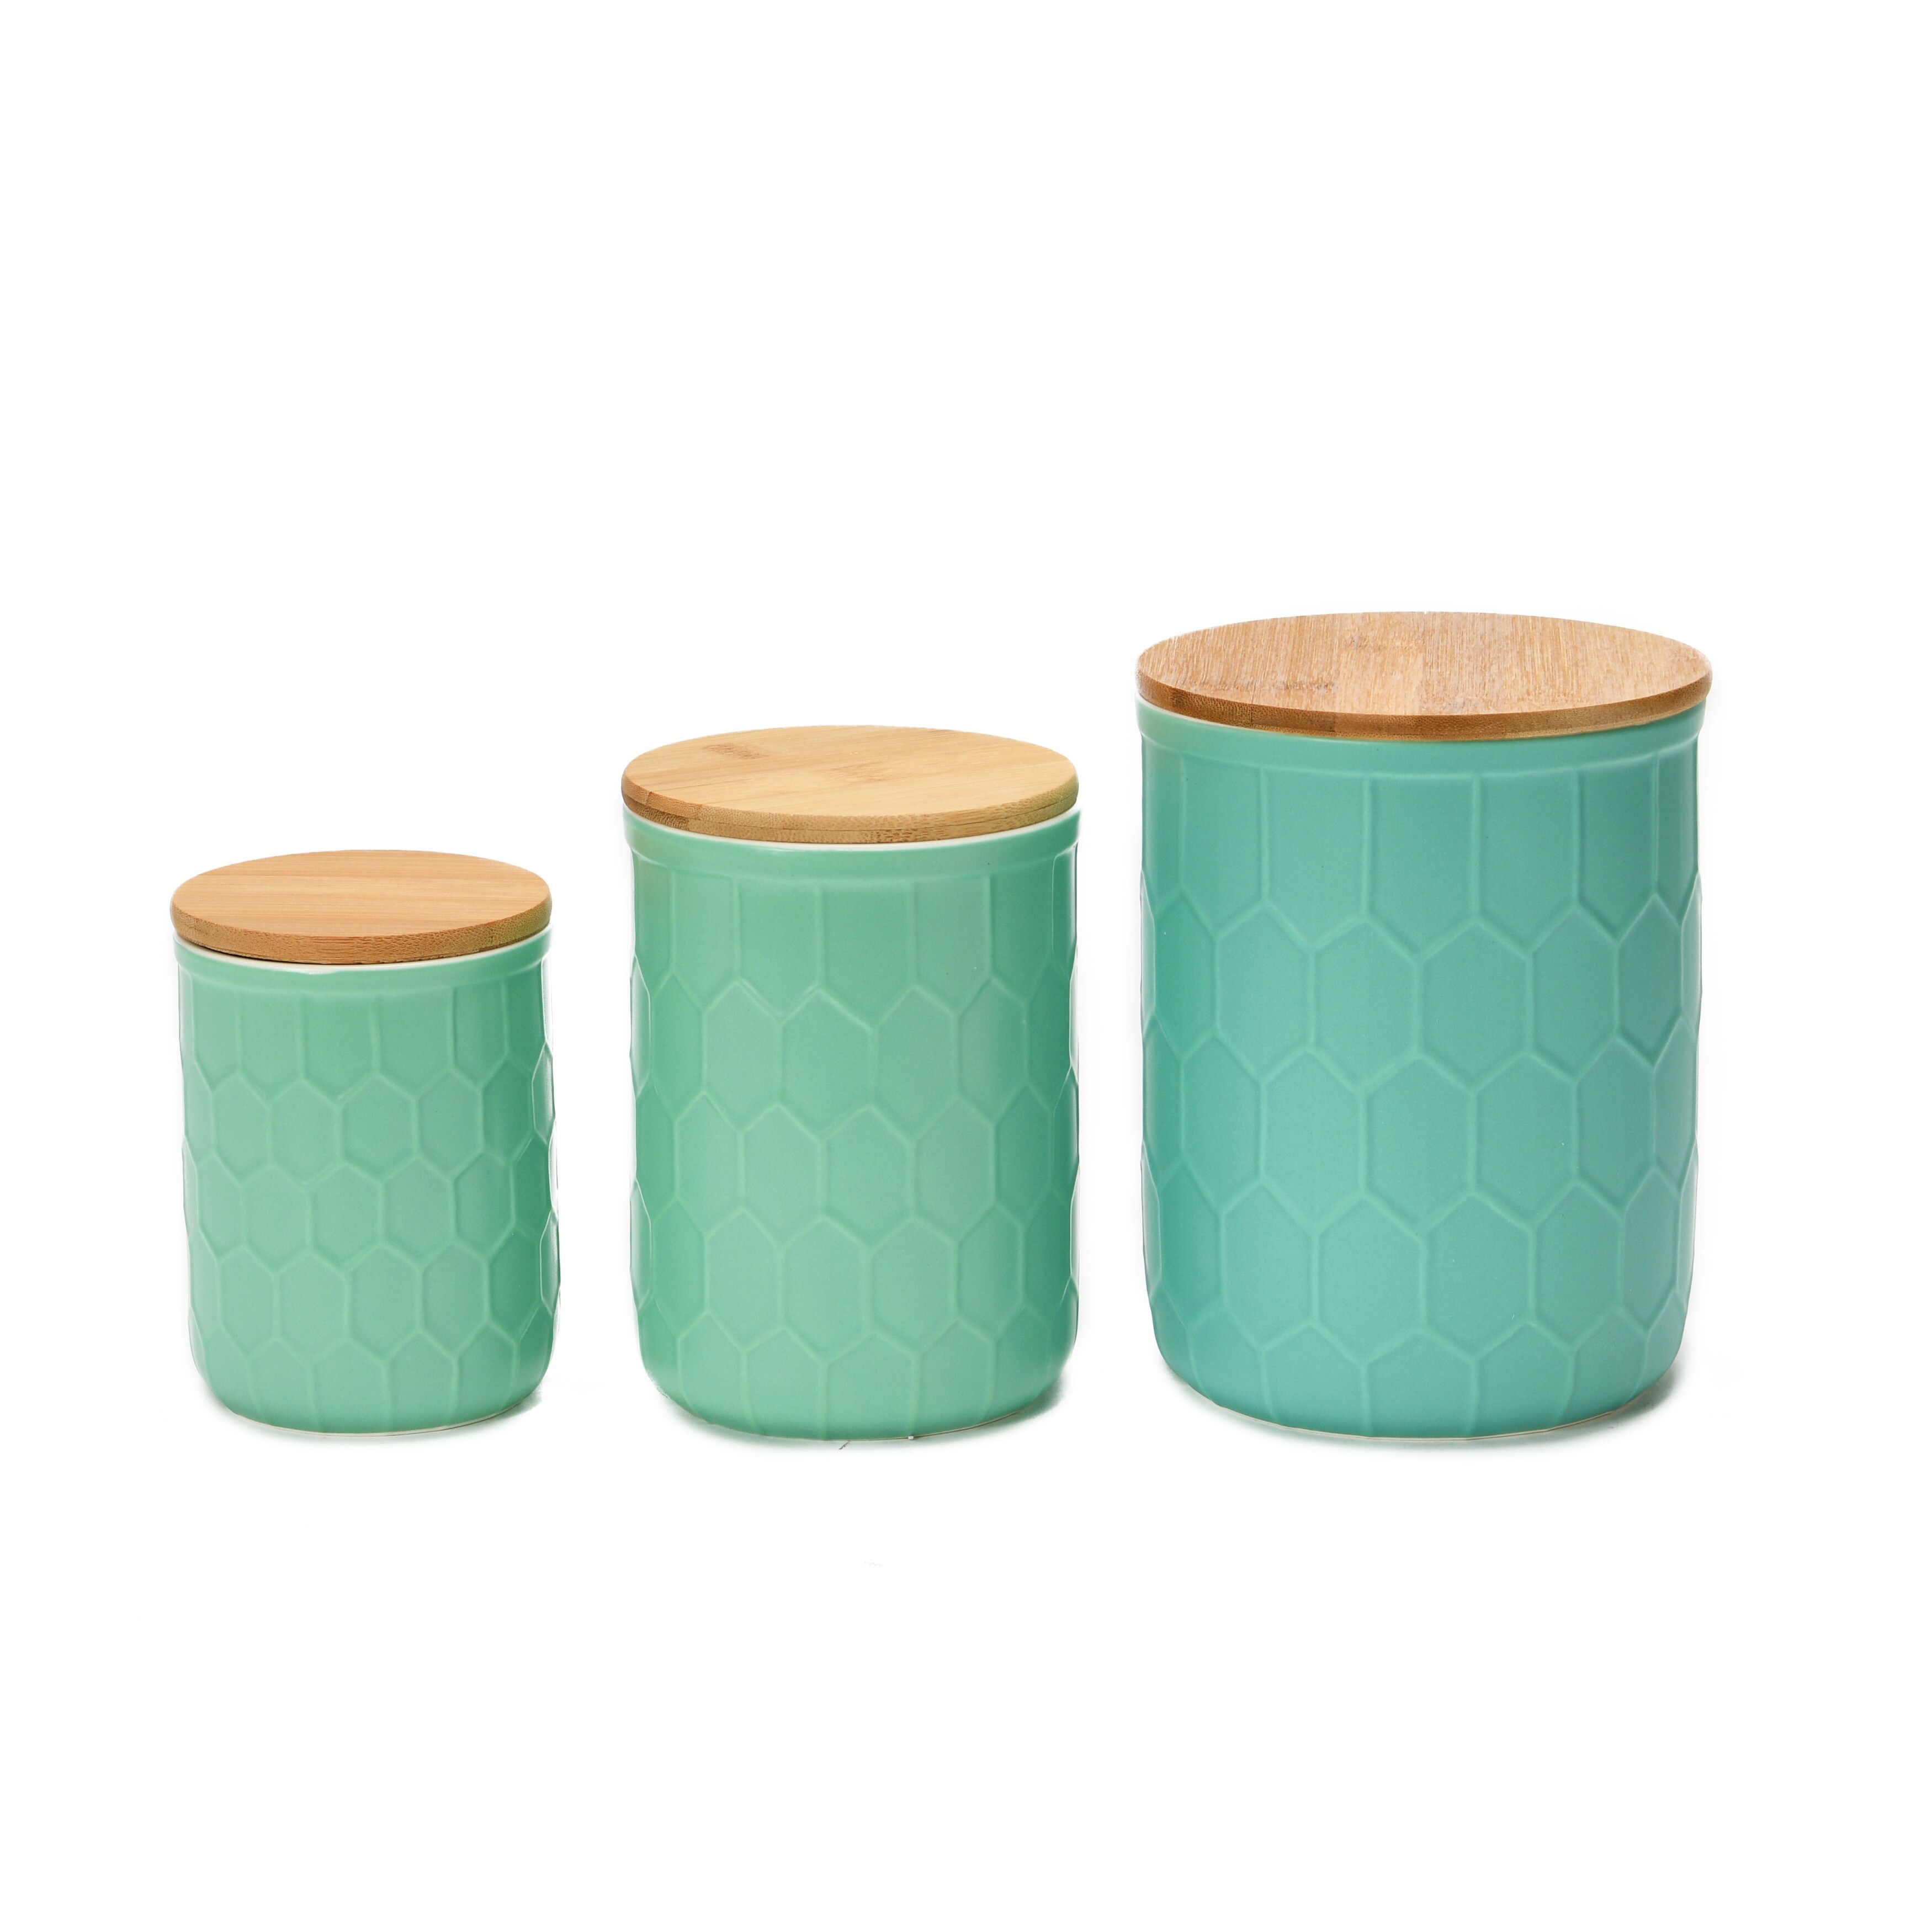 Floral Embossed Clamp Jars, Set of 3, Food Storage Containers